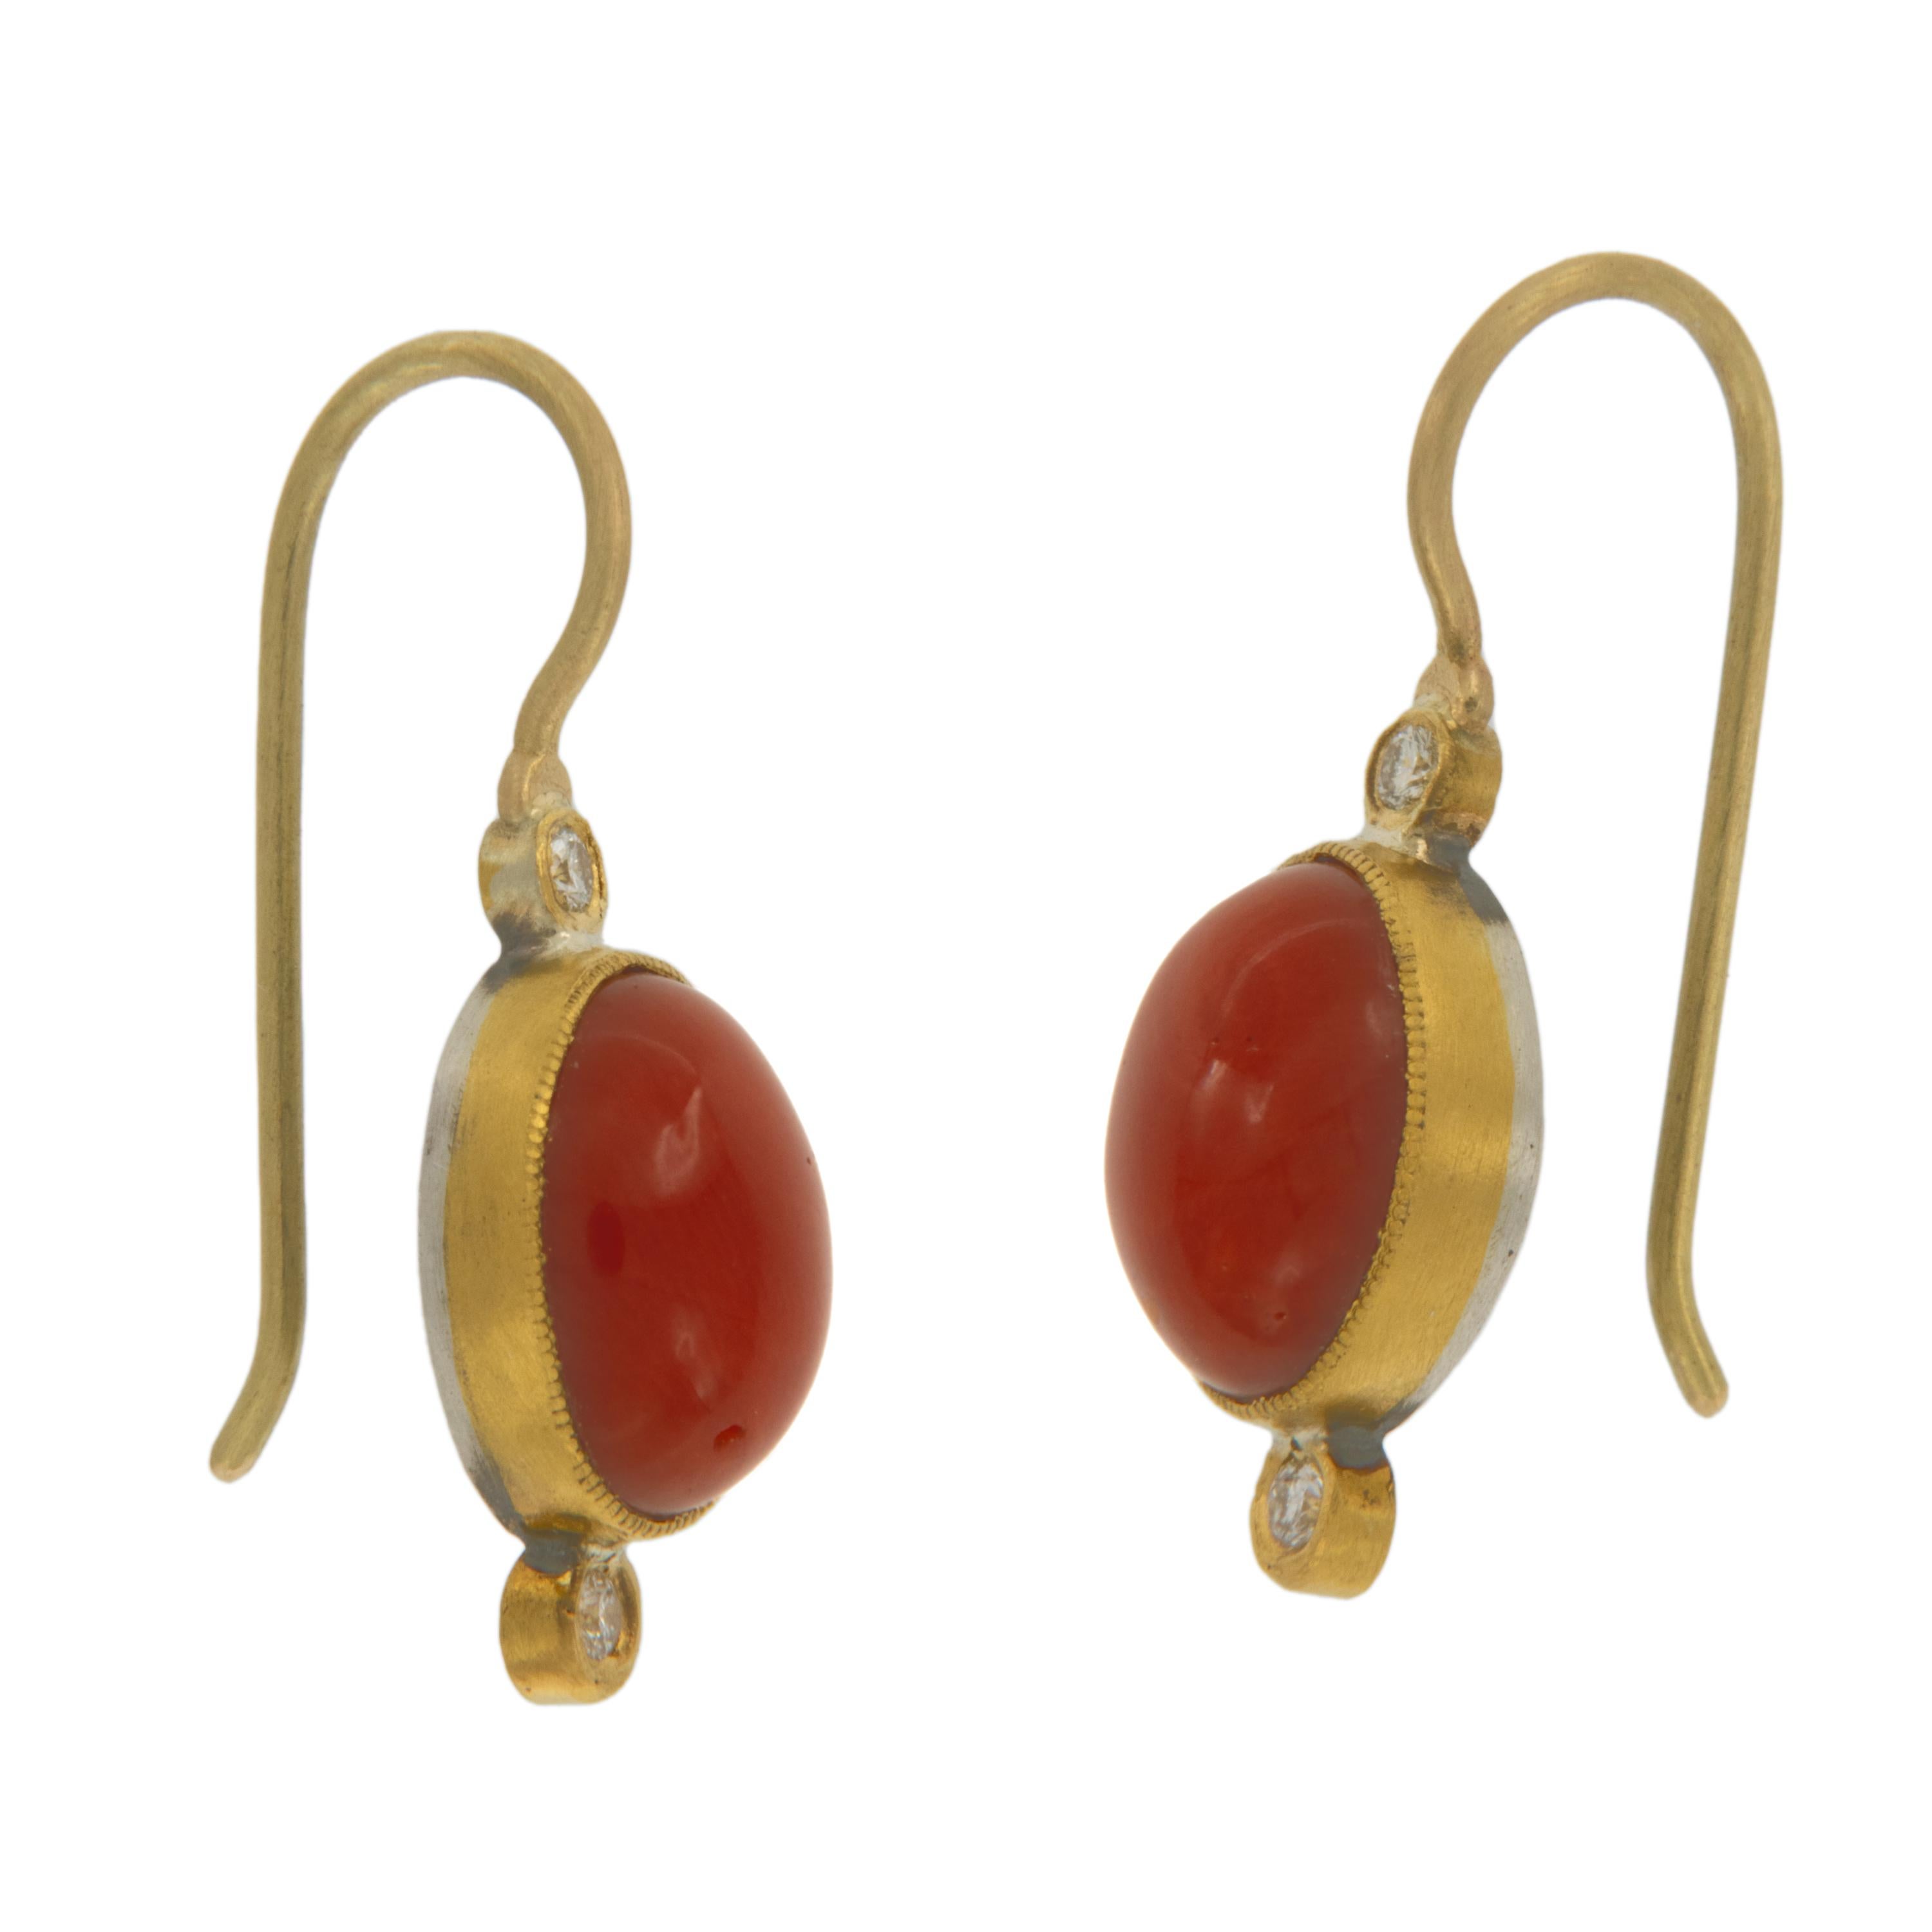 A perfect combination - pure 24 karat yellow gold, silver & coral! Ancient Egyptians used coral pieces in tombs as protection against evil spirits in the afterworld, as it is believed to contain a drop of divine blood. Why not protect yourself while